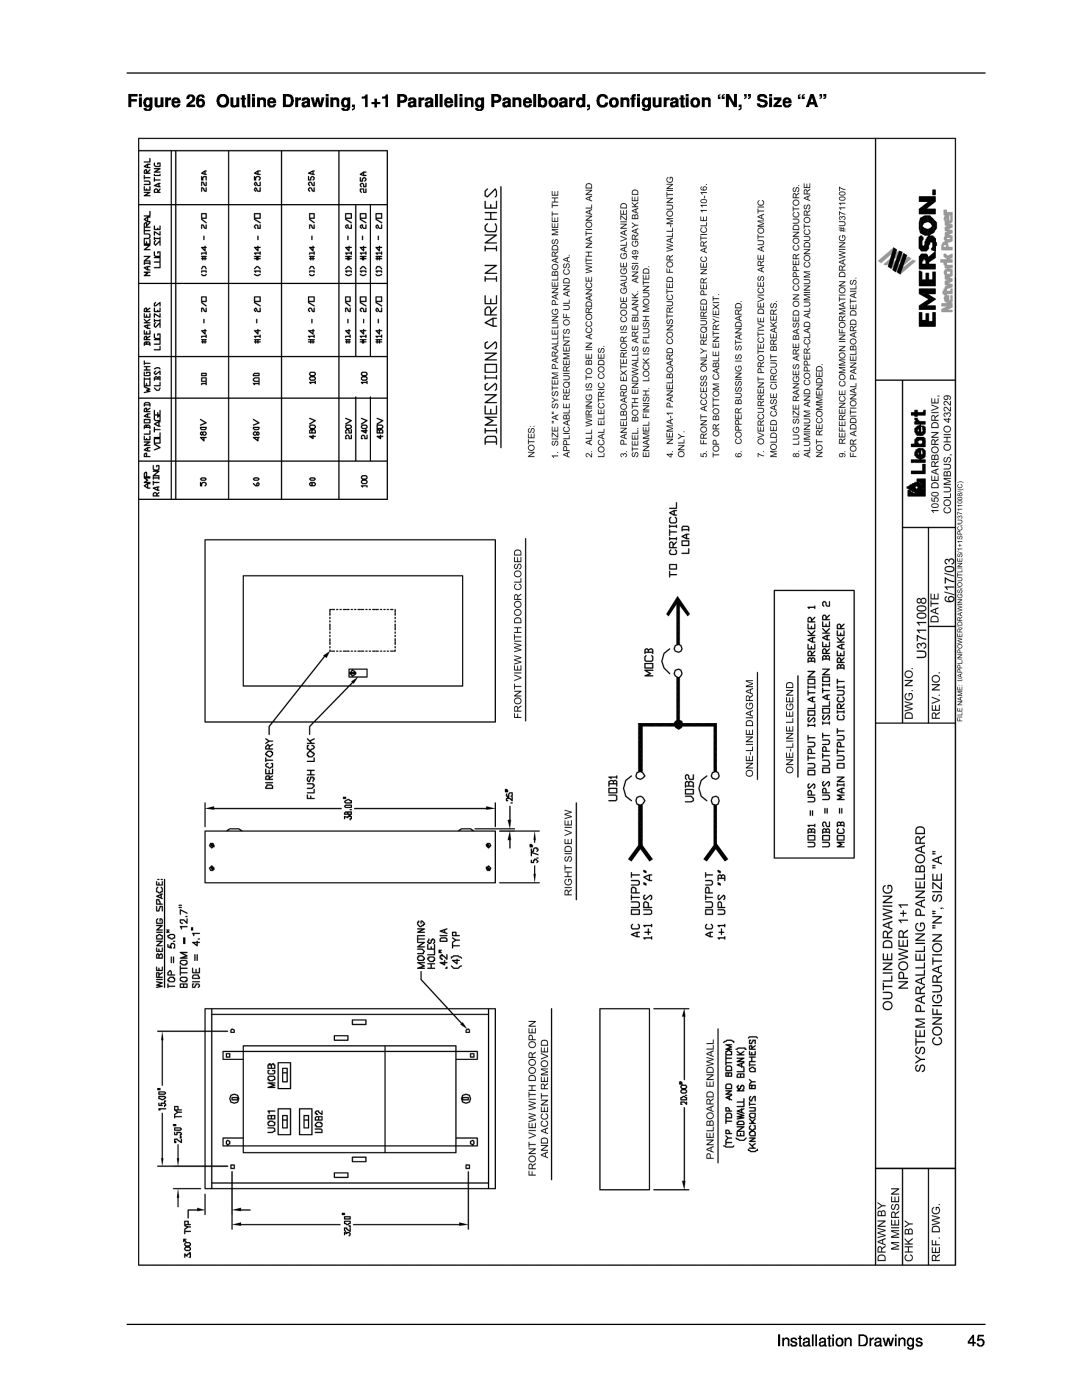 Emerson 30-130 kVA installation manual Size “A”, Installation, Drawings, Outline Drawing, NPOWER 1+1, 6/17/03 